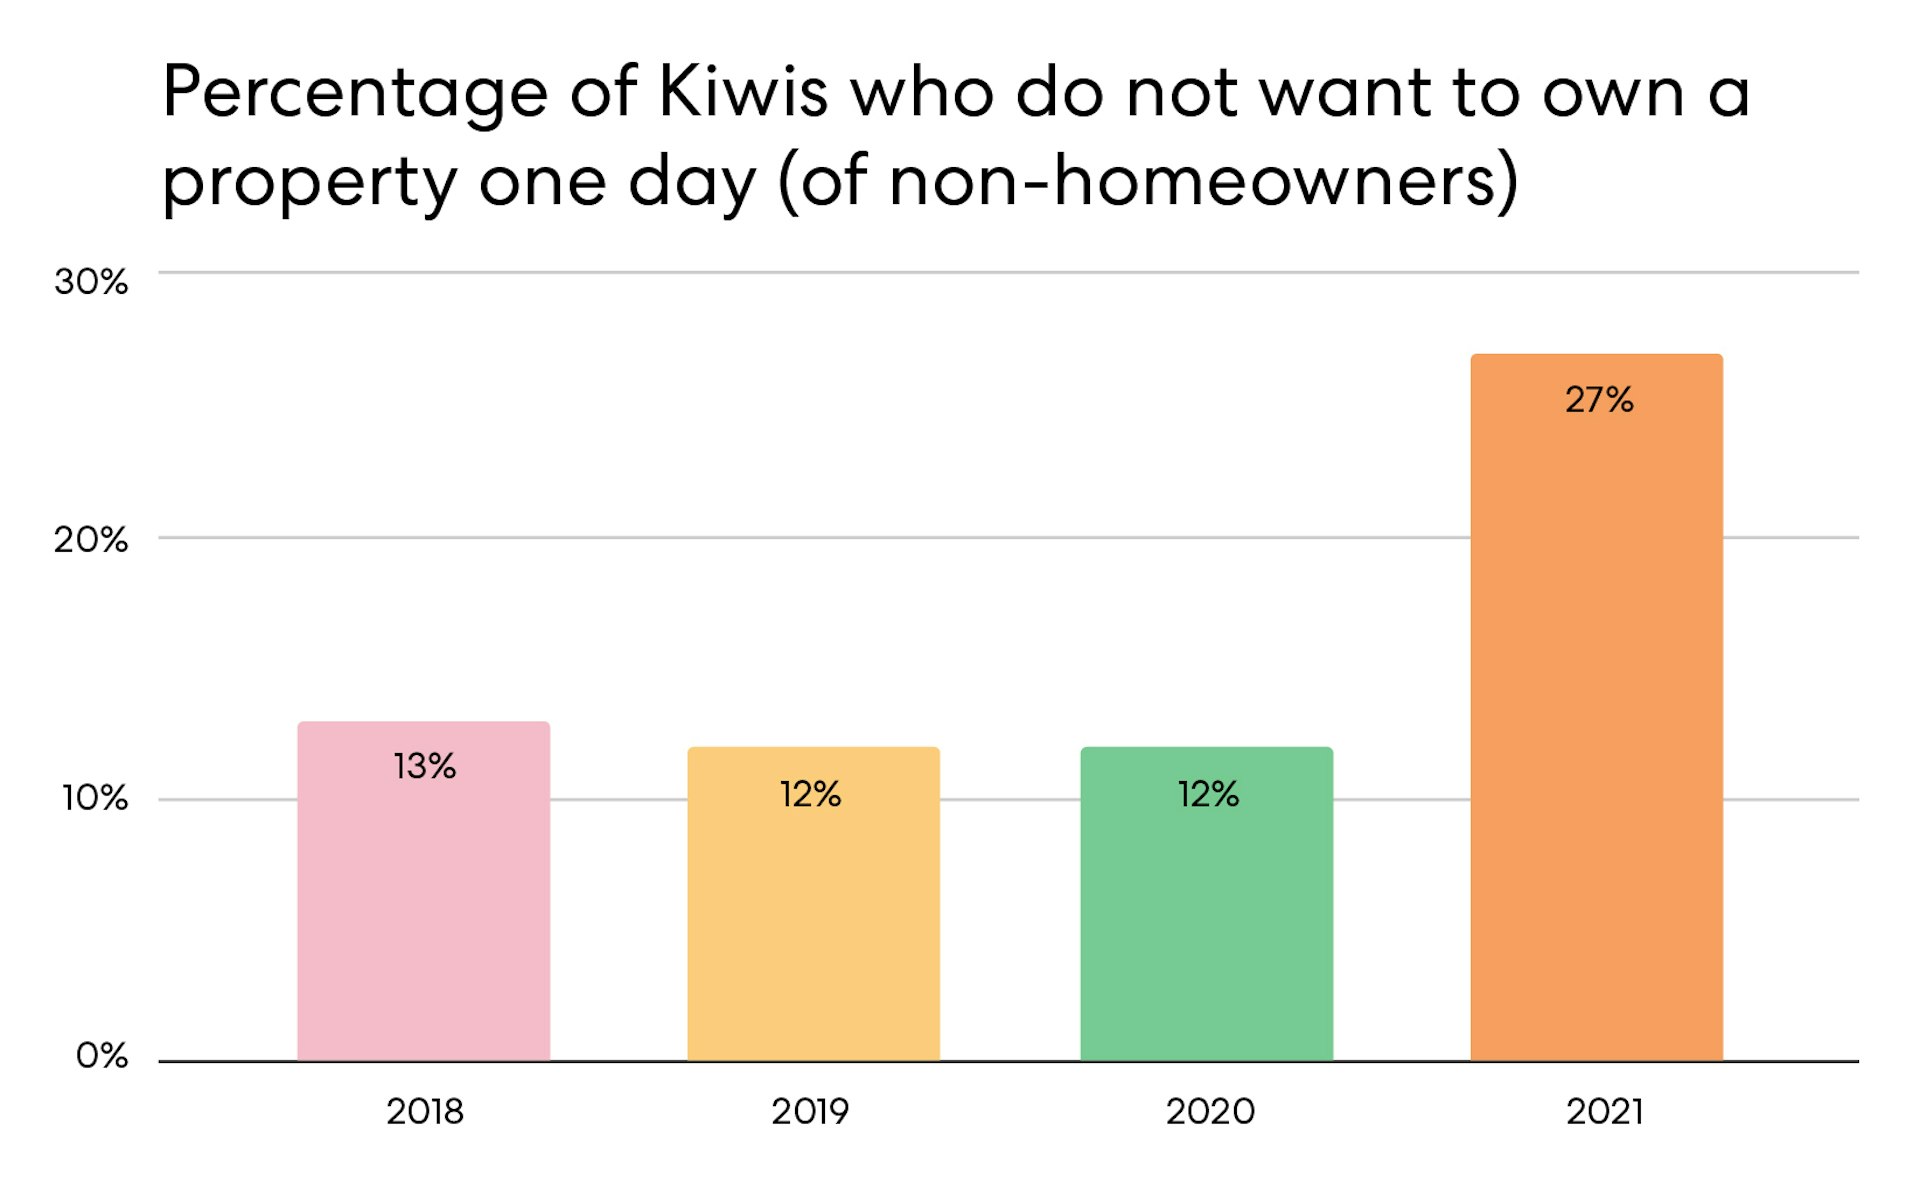 Bar graph showing percentage of Kiwis who do not want to own a property rising from 13% in 2018 to 27% in 2021.